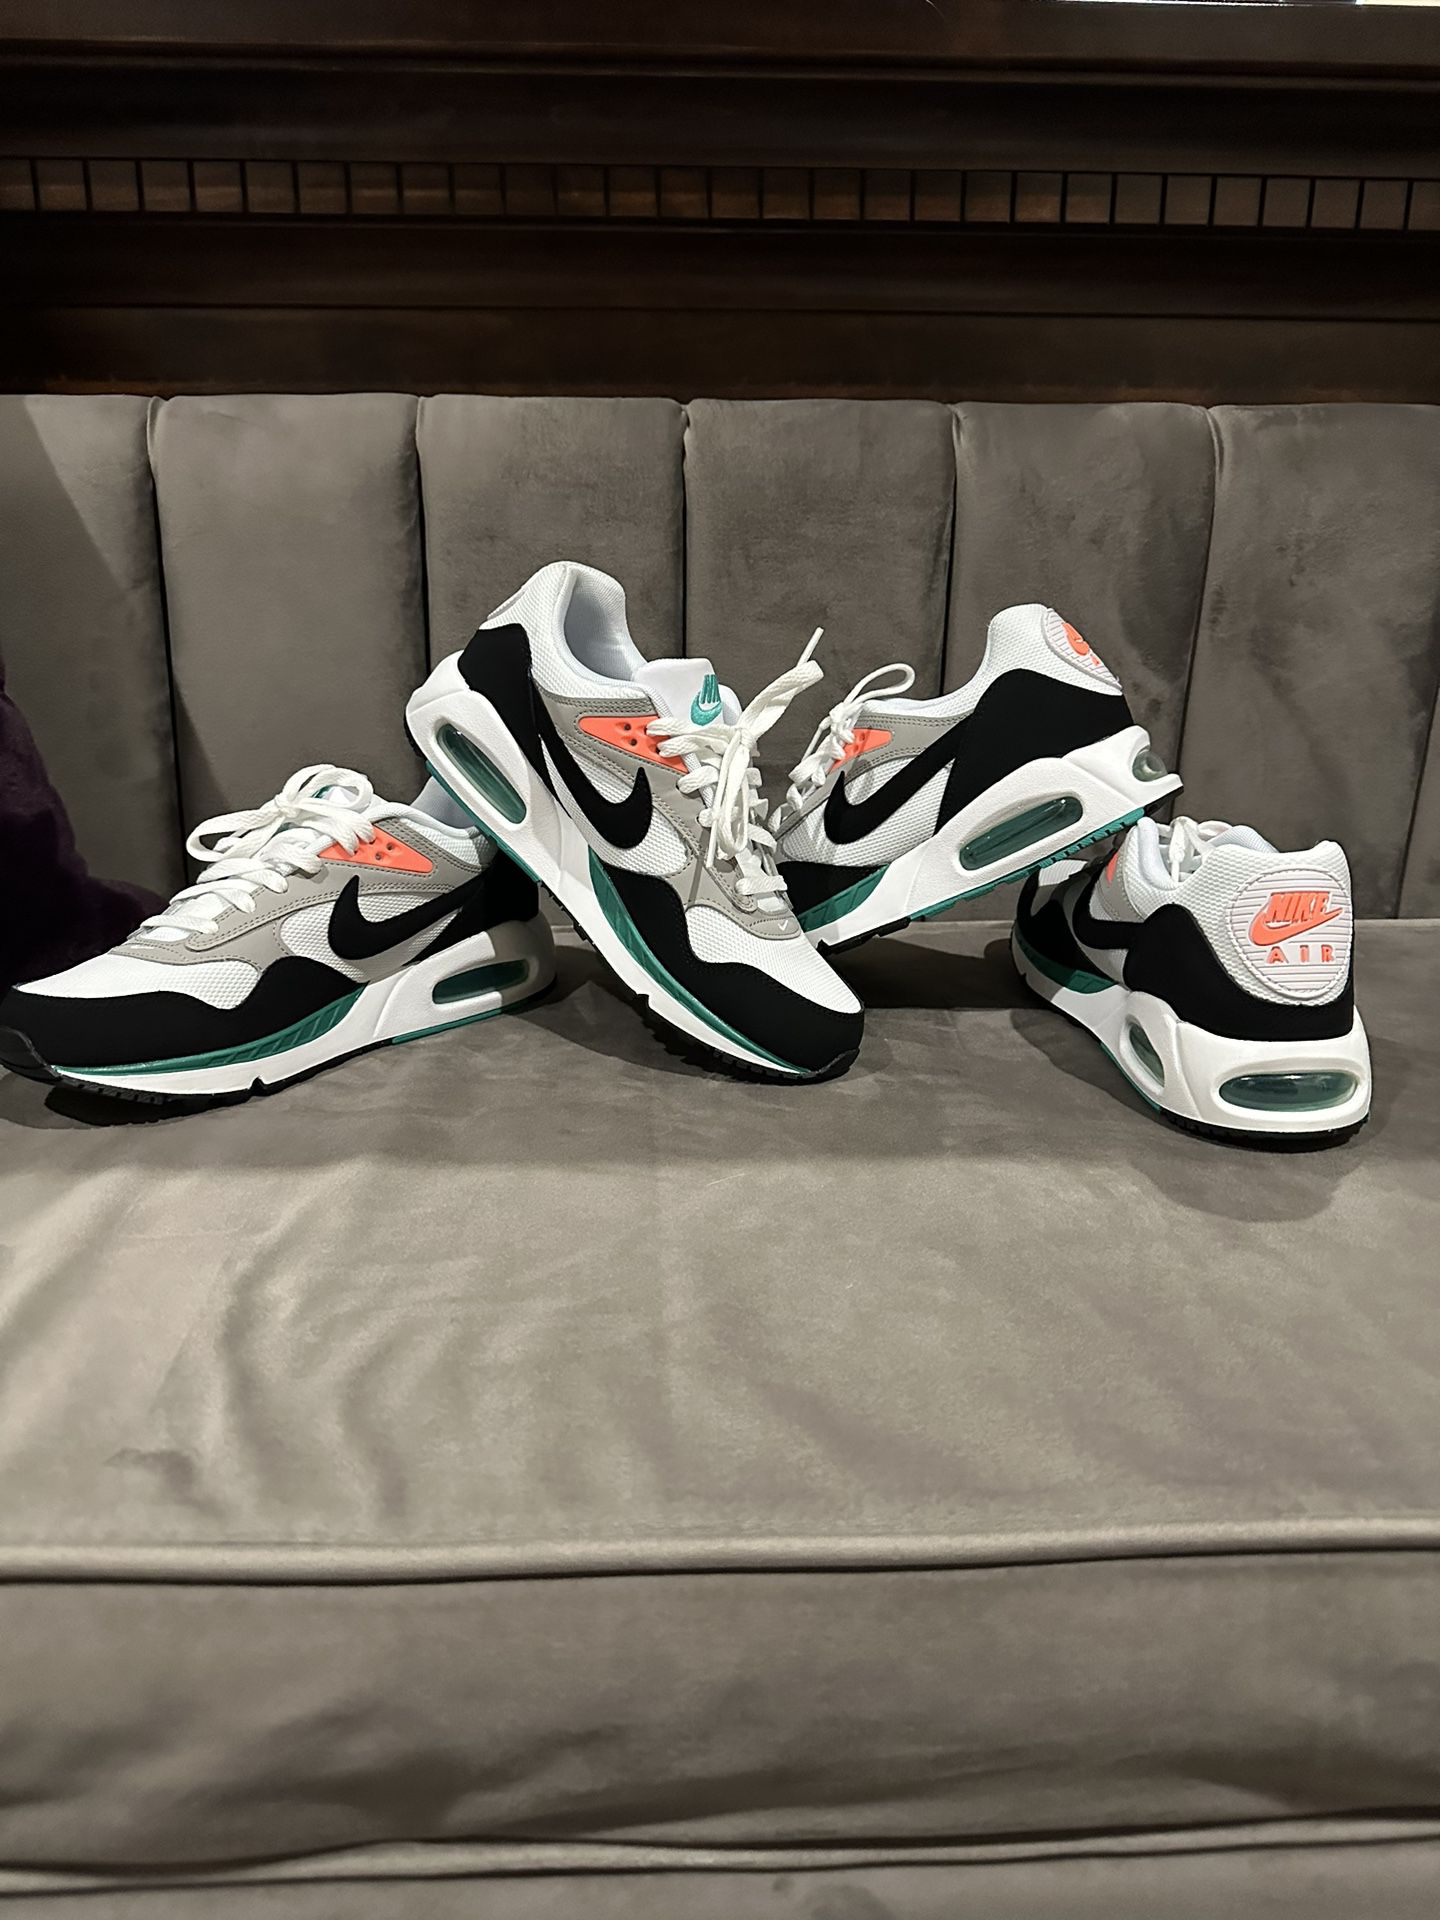 Nike Air Max Shoes for sale in Combined Locks, Wisconsin